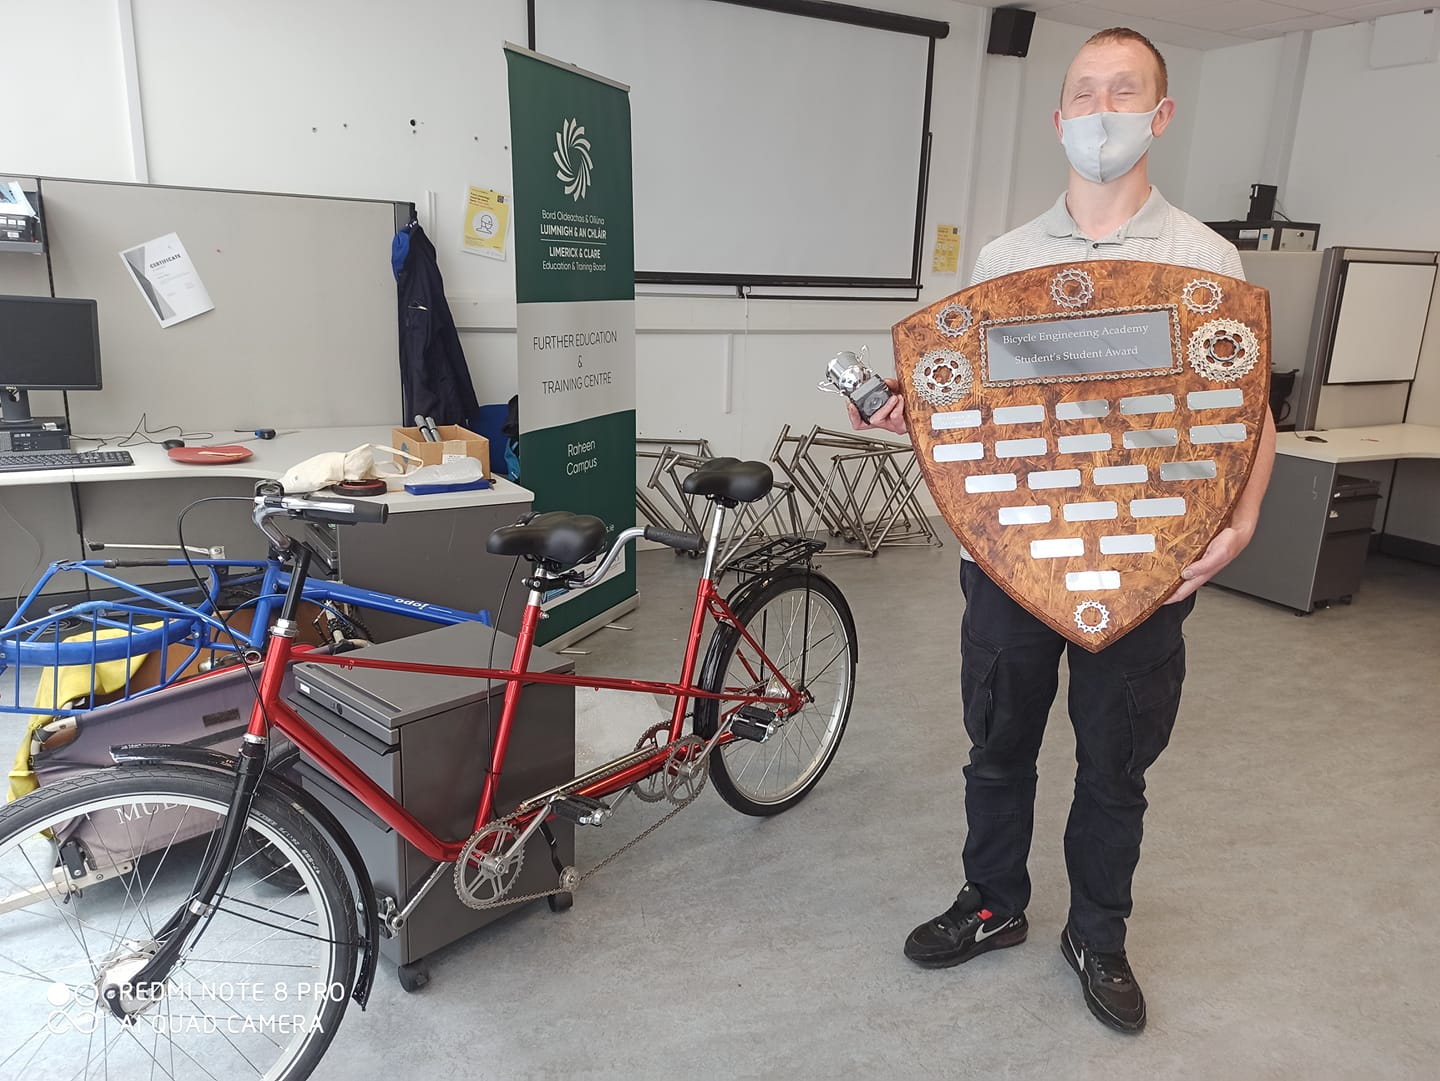 David Sheehan, a blind engineering graduate from the Bicycle Engineering Academy develops first fully inclusive cycling option in the country with his invention